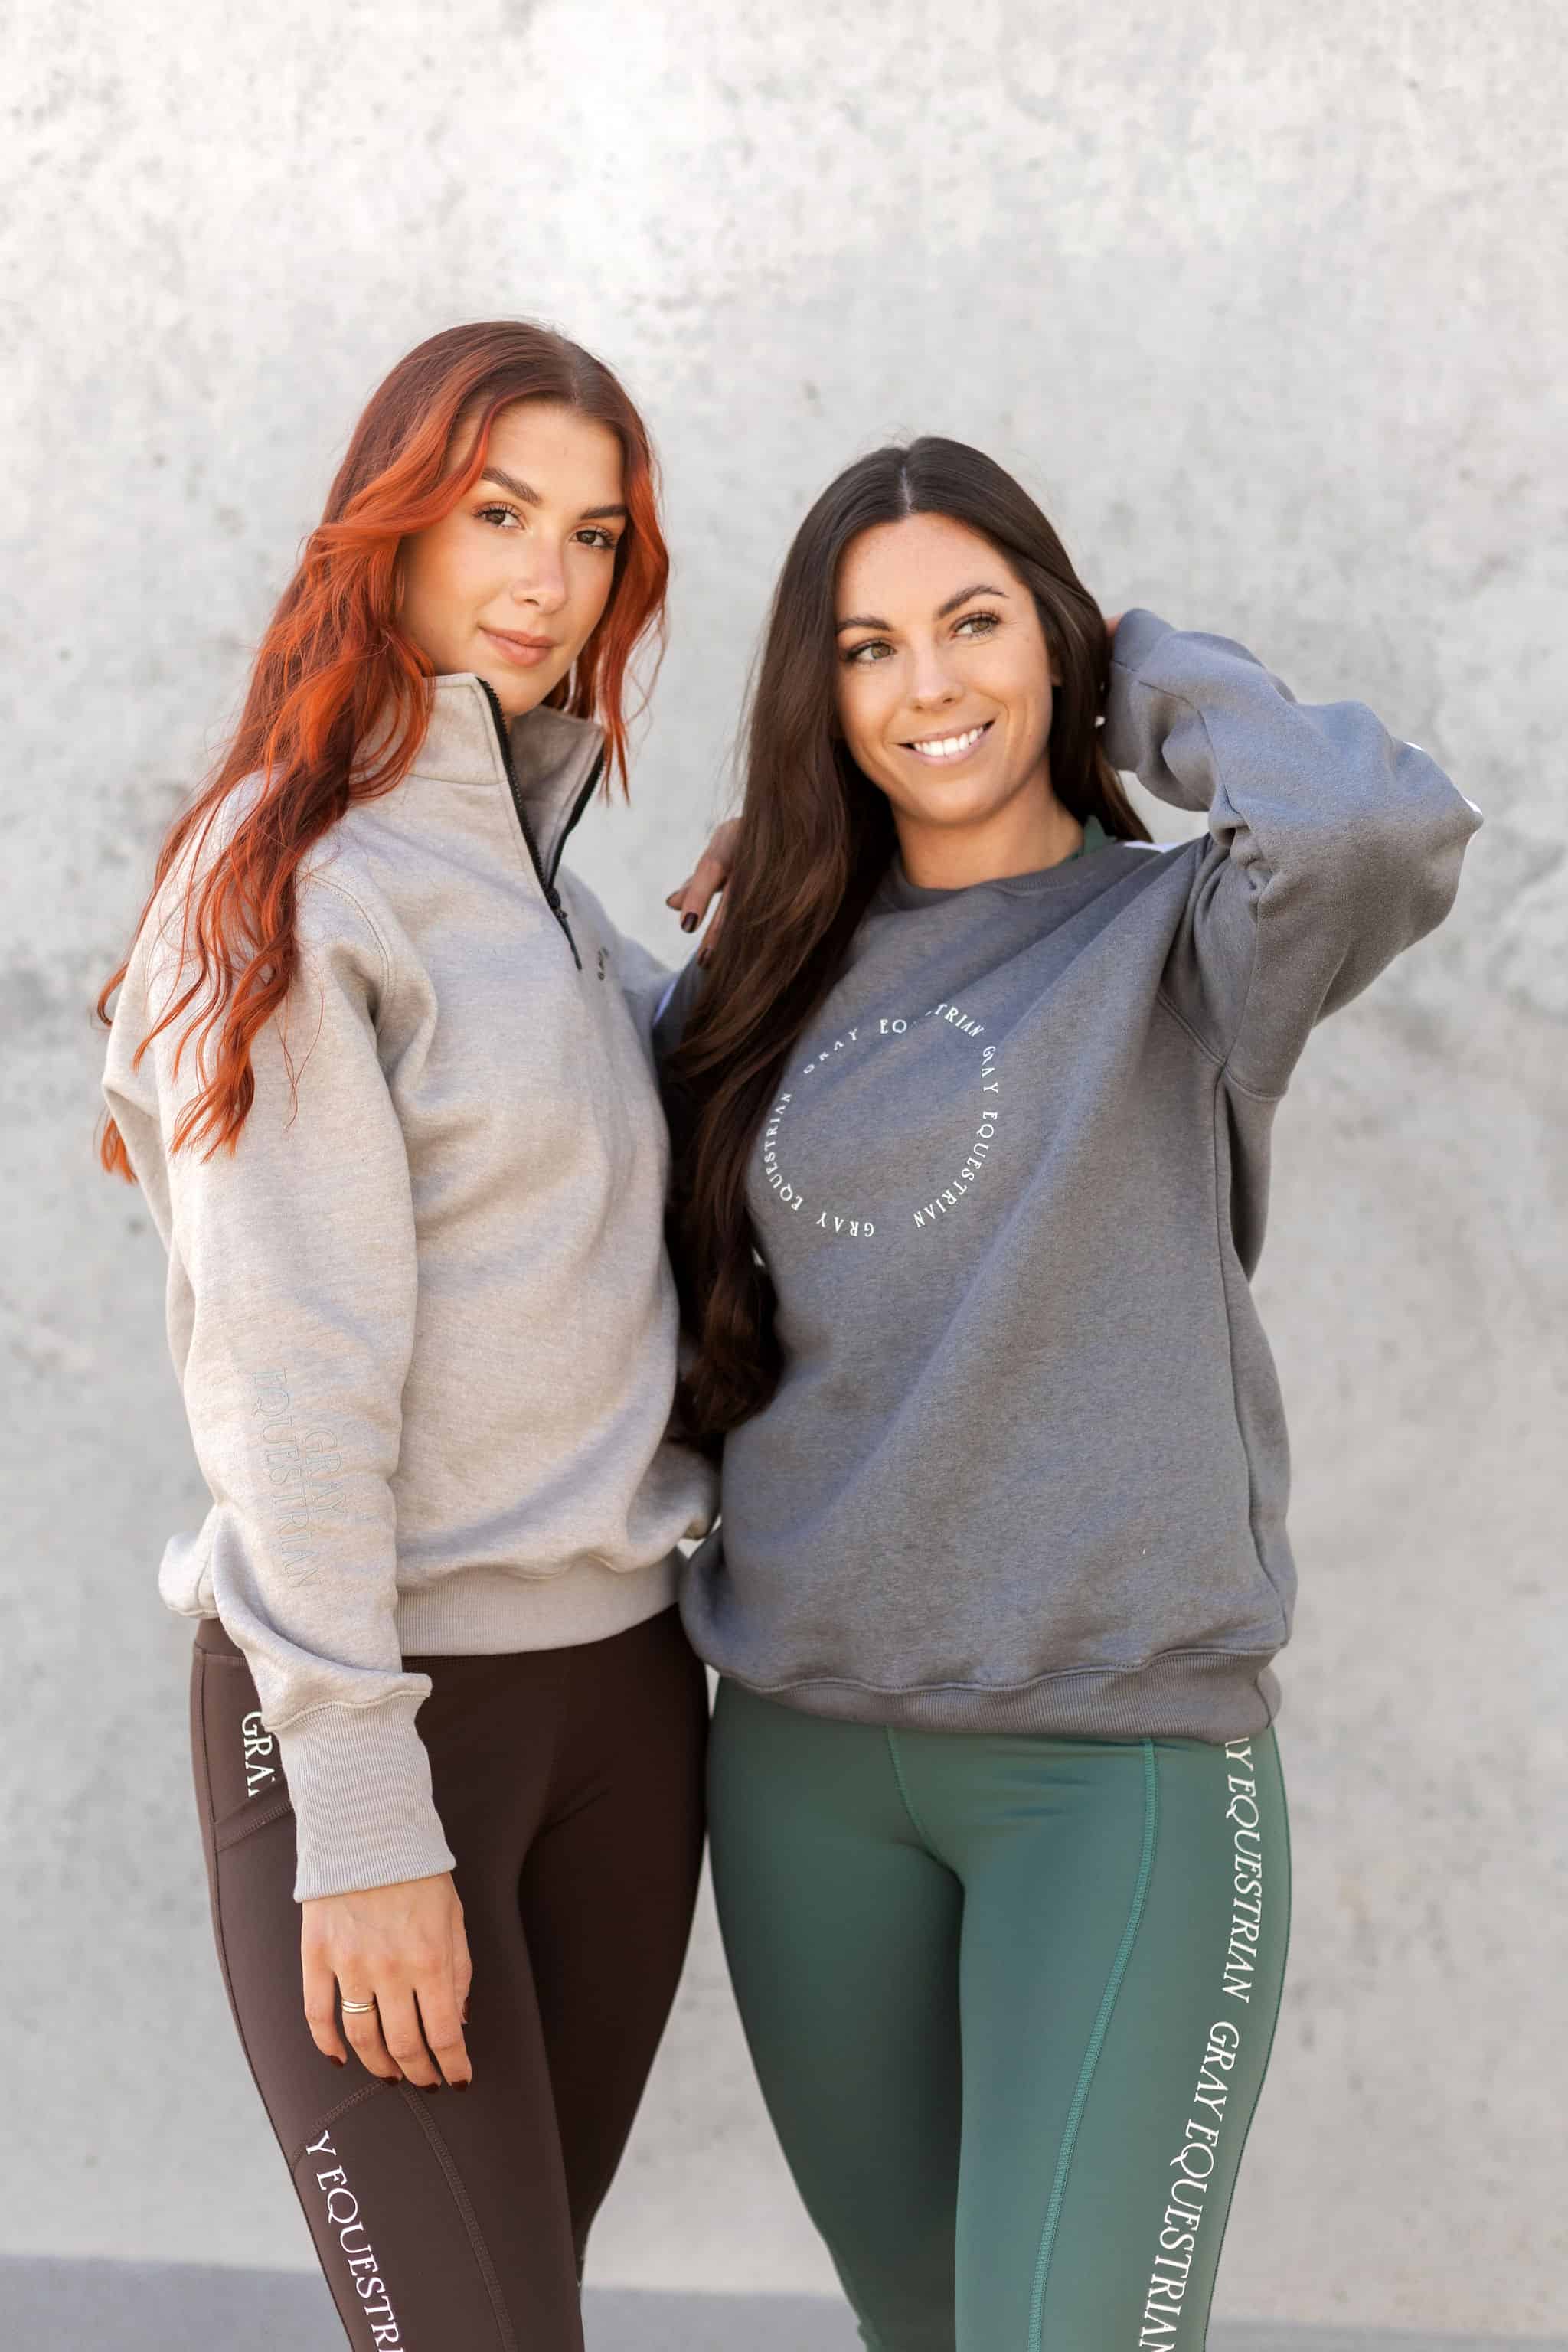 Two models standing side by side. The model on the left is wearing out taupe grey 1/4 zip sweatshirt and brown leggings. The model on the right is wearing our grey and white sweatshirt and green leggings.